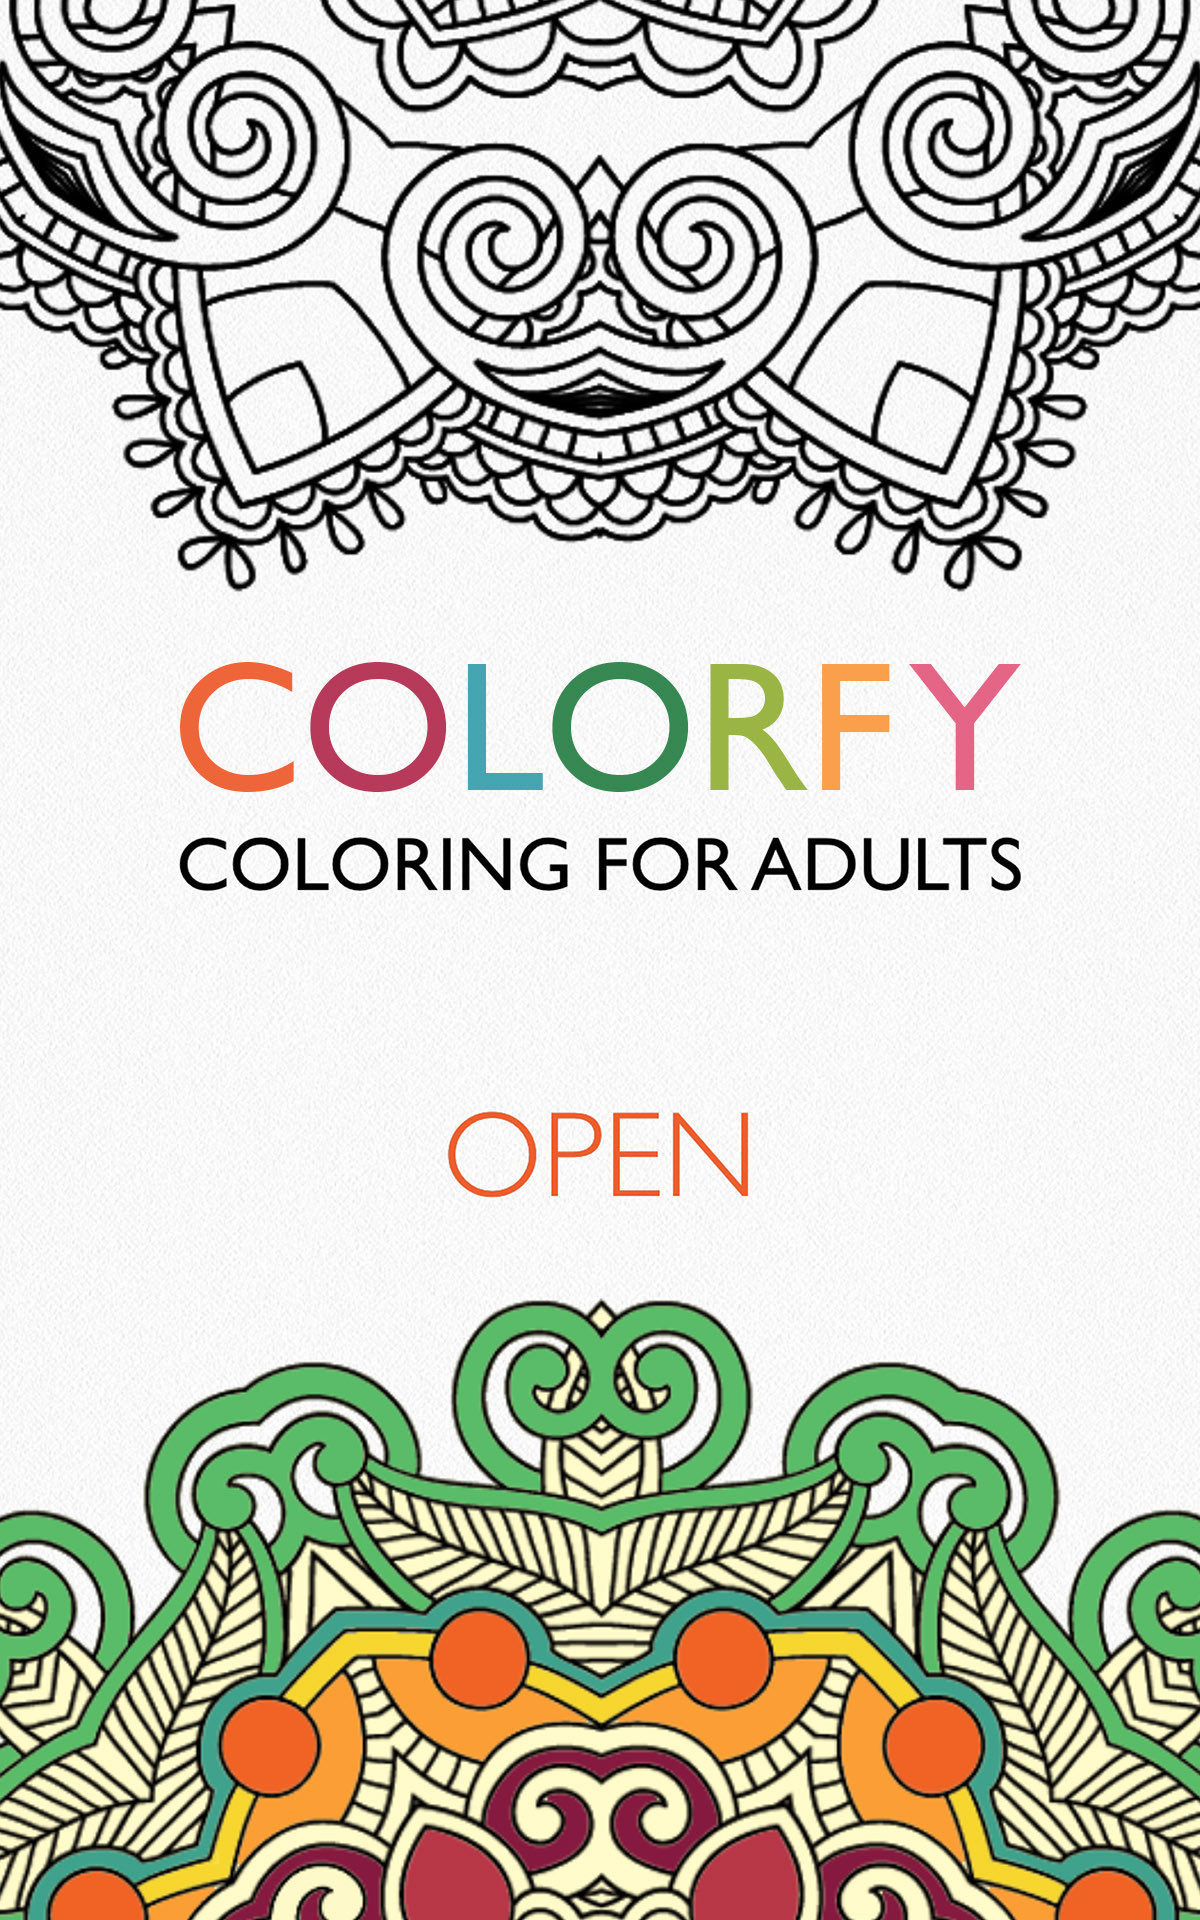 Coloring Books For Adults App
 Amazon Colorfy Coloring Book for Adults Free